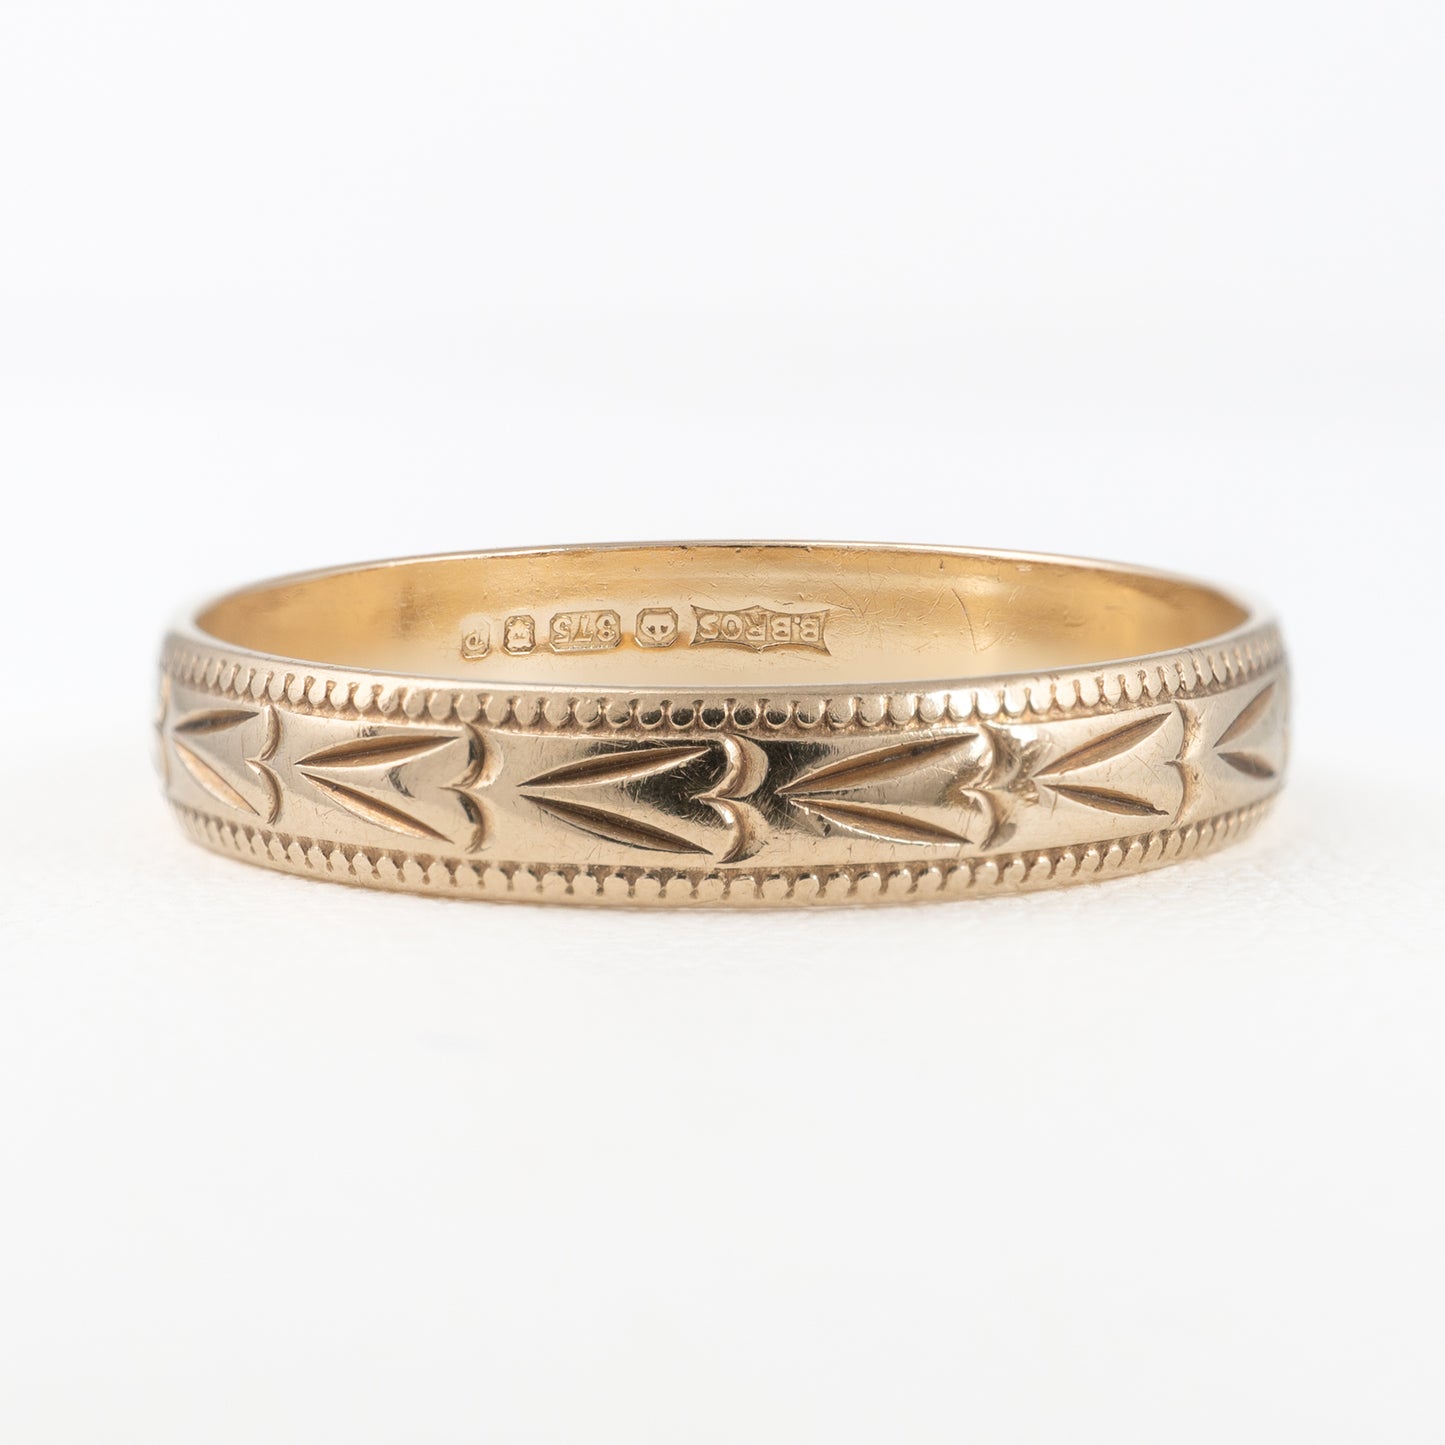 Vintage Gold Band Ring with Chased Heart Design